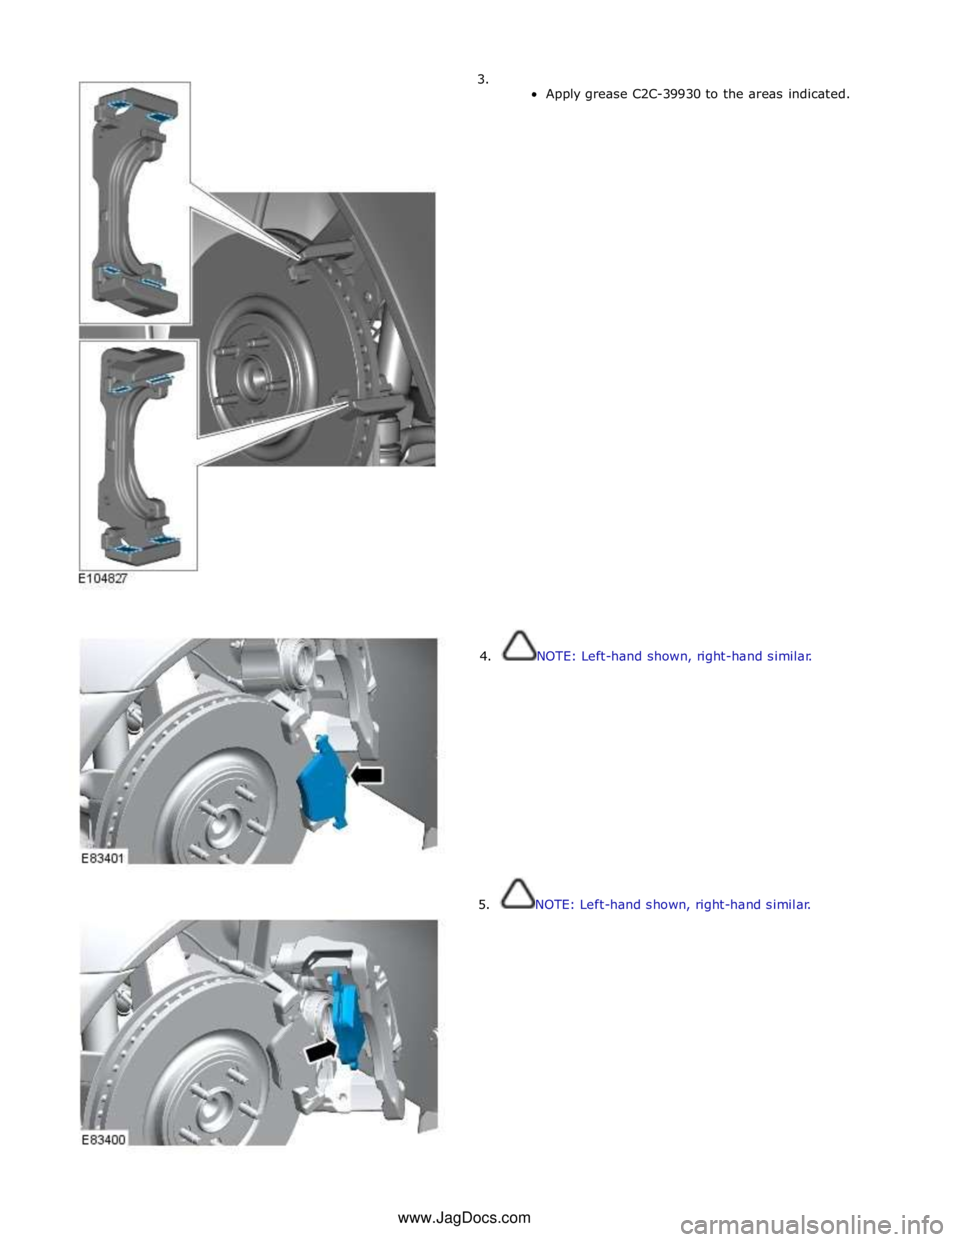 JAGUAR XFR 2010 1.G Workshop Manual 3. 
Apply grease C2C-39930 to the areas indicated. 
 
 
 
 
 
 
 
 
 
 
 
 
 
 
 
 
 
 
 
 
 
 
 
 
 
 
 
 
 
 
 
 
 
 
        4.  NOTE: Left-hand shown, right-hand similar. 
5.  NOTE: Left-hand show